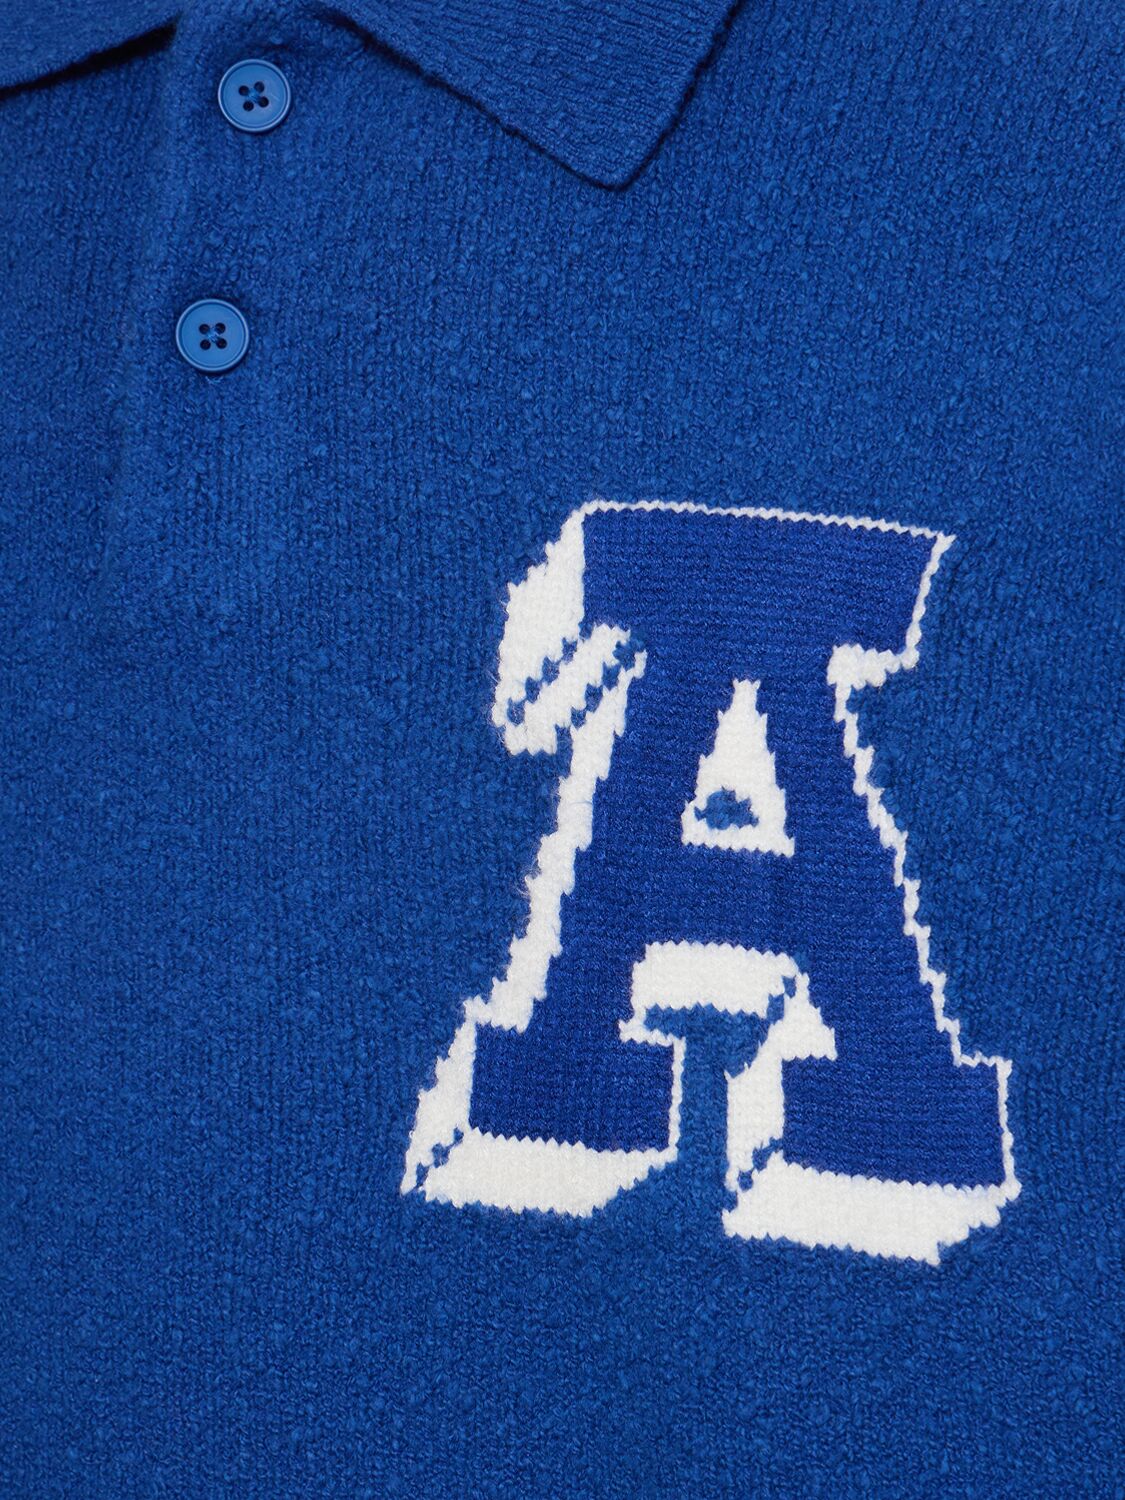 Shop Axel Arigato Team Polo Cotton Blend Sweater In Blue